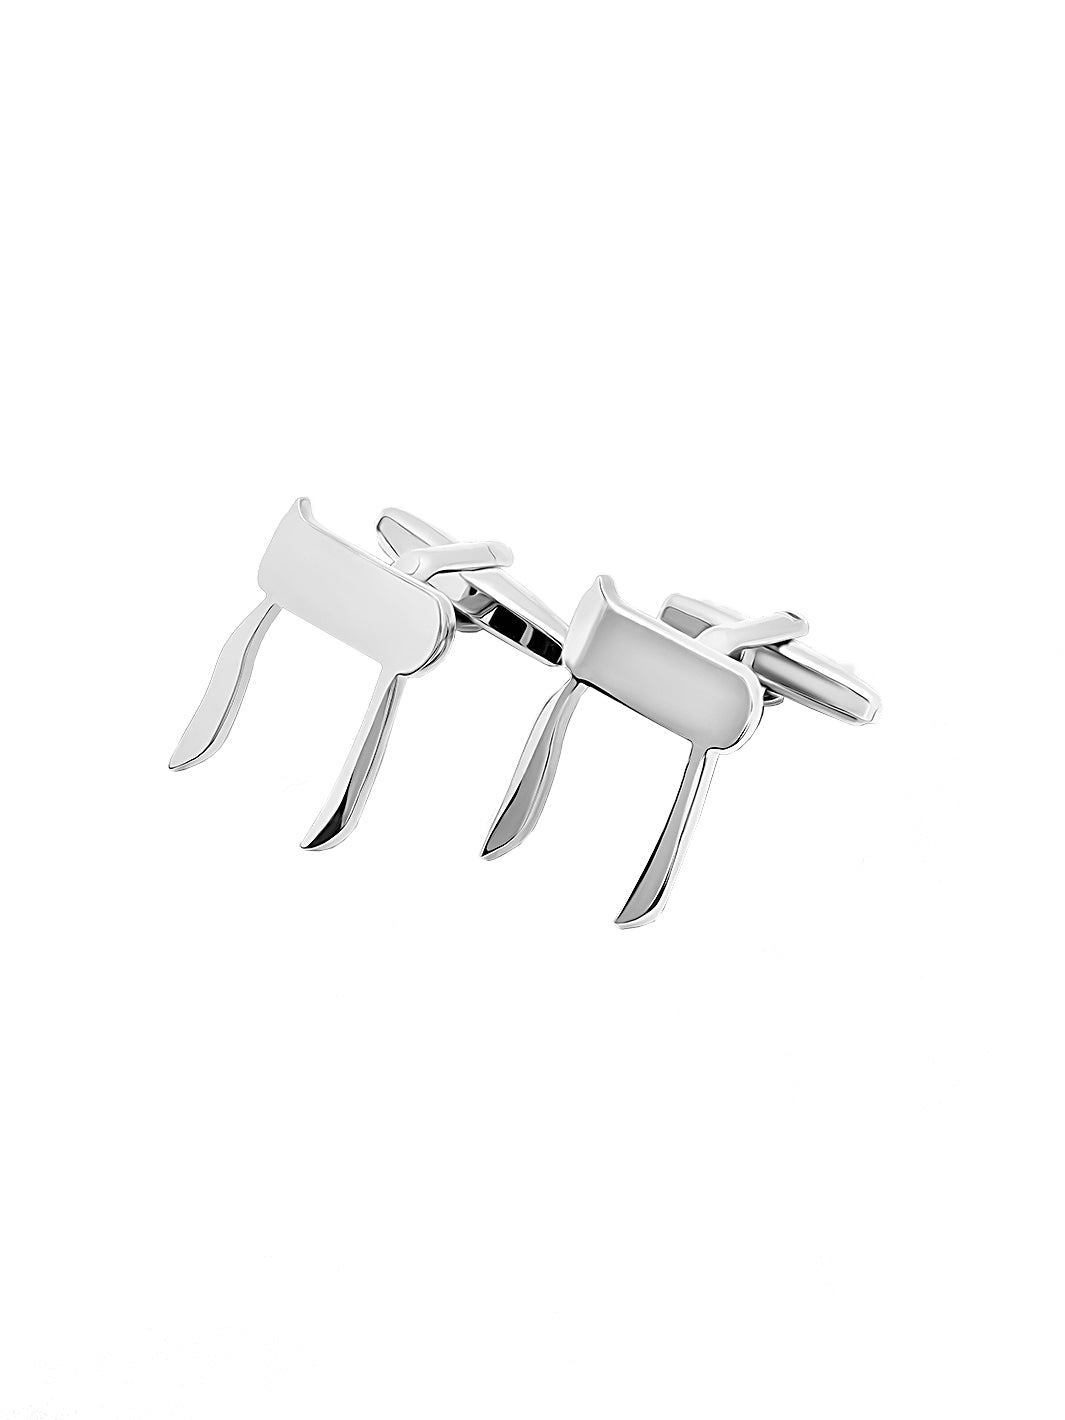 T.O. Collection Cufflinks - Ches